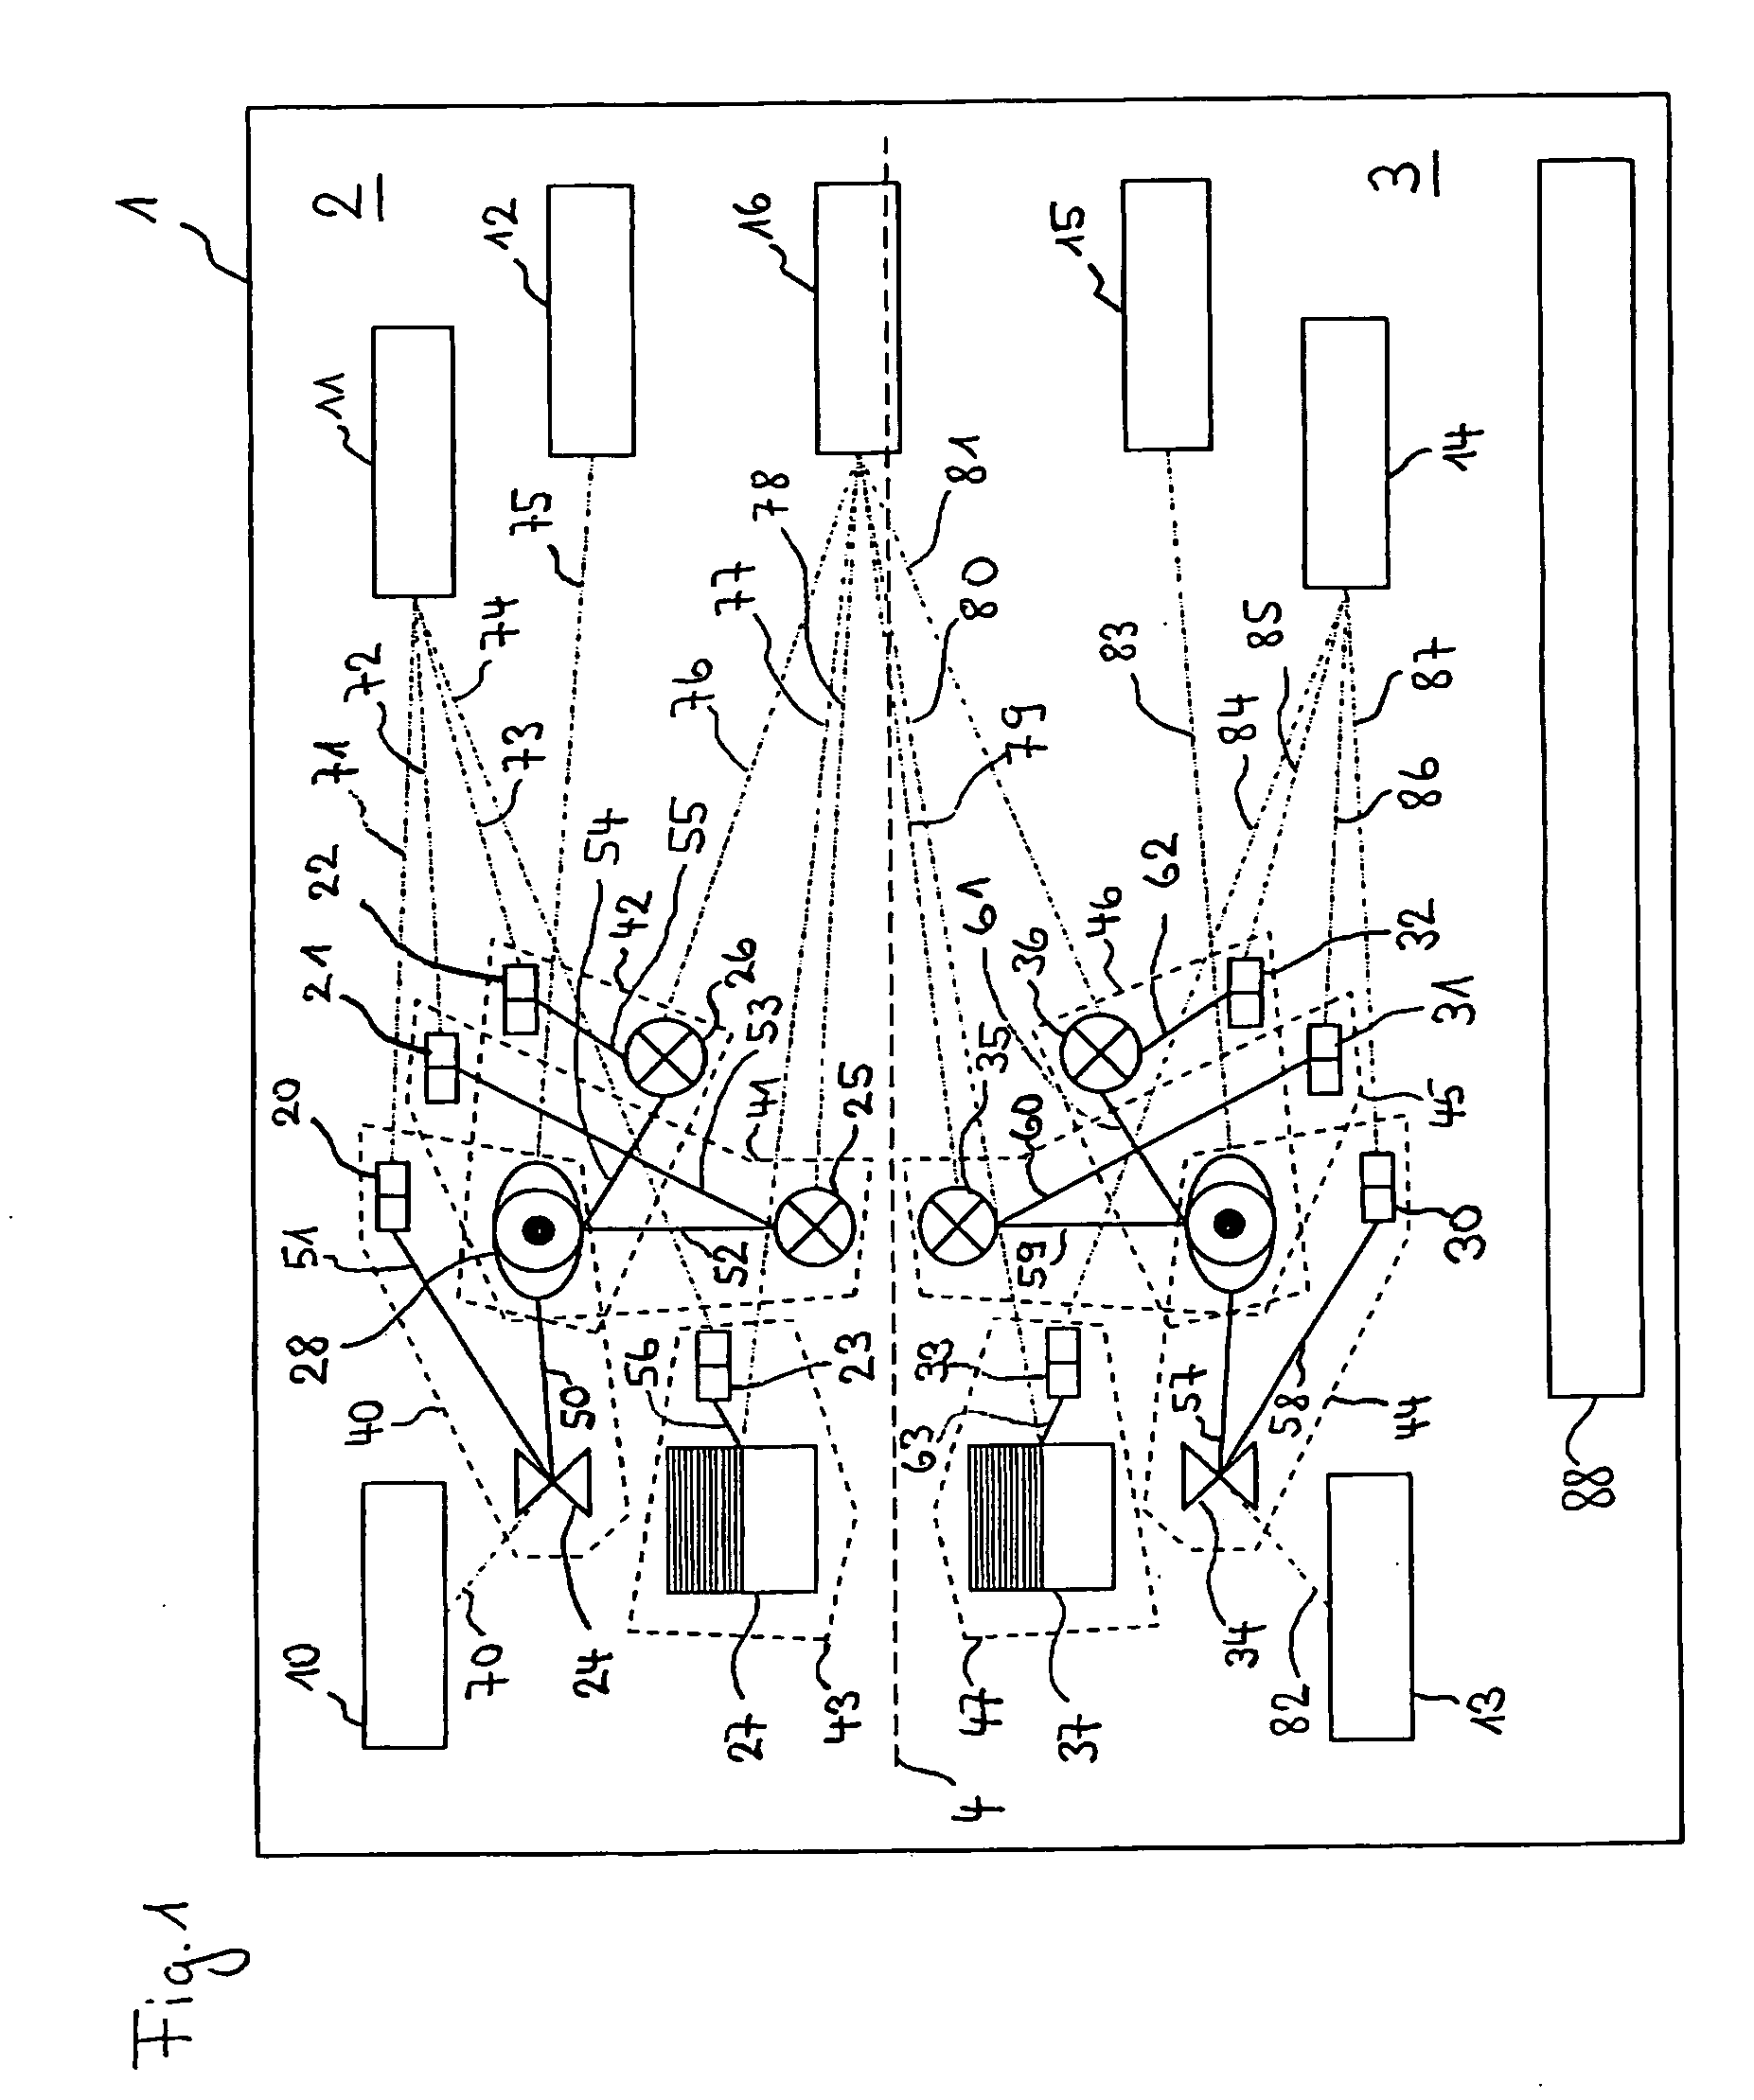 Method and system for generating combination of applications for building automation system